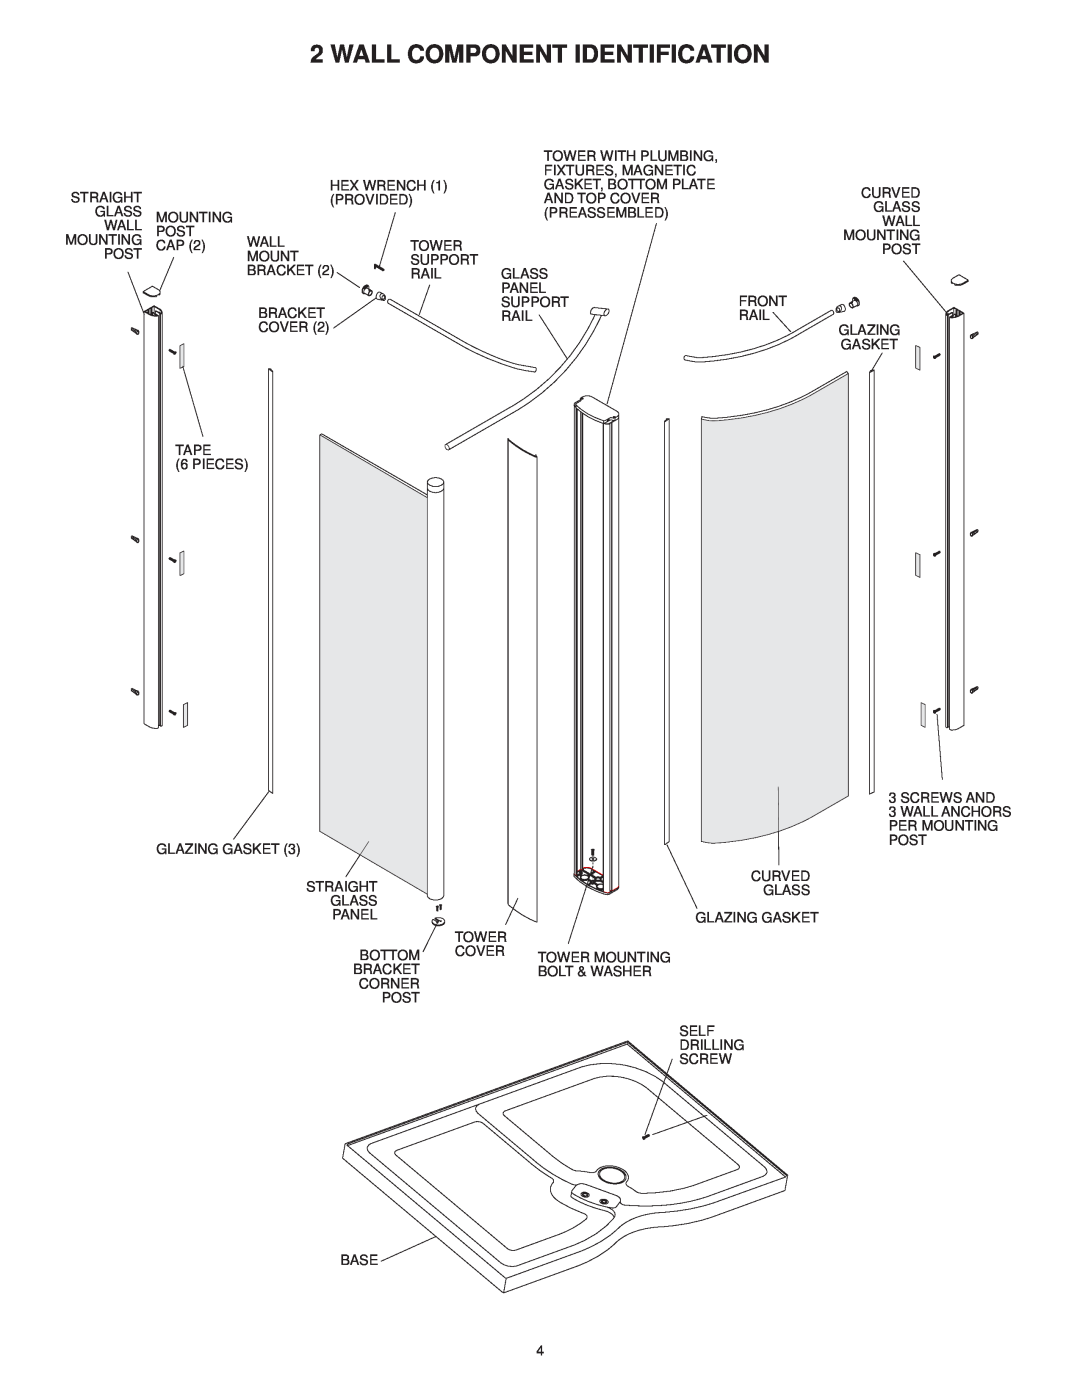 Jacuzzi SUMMER RAINTM 2 WALL & 3 WALL WALK-IN SHOWER SYSTEMS manual Wall Component Identification 